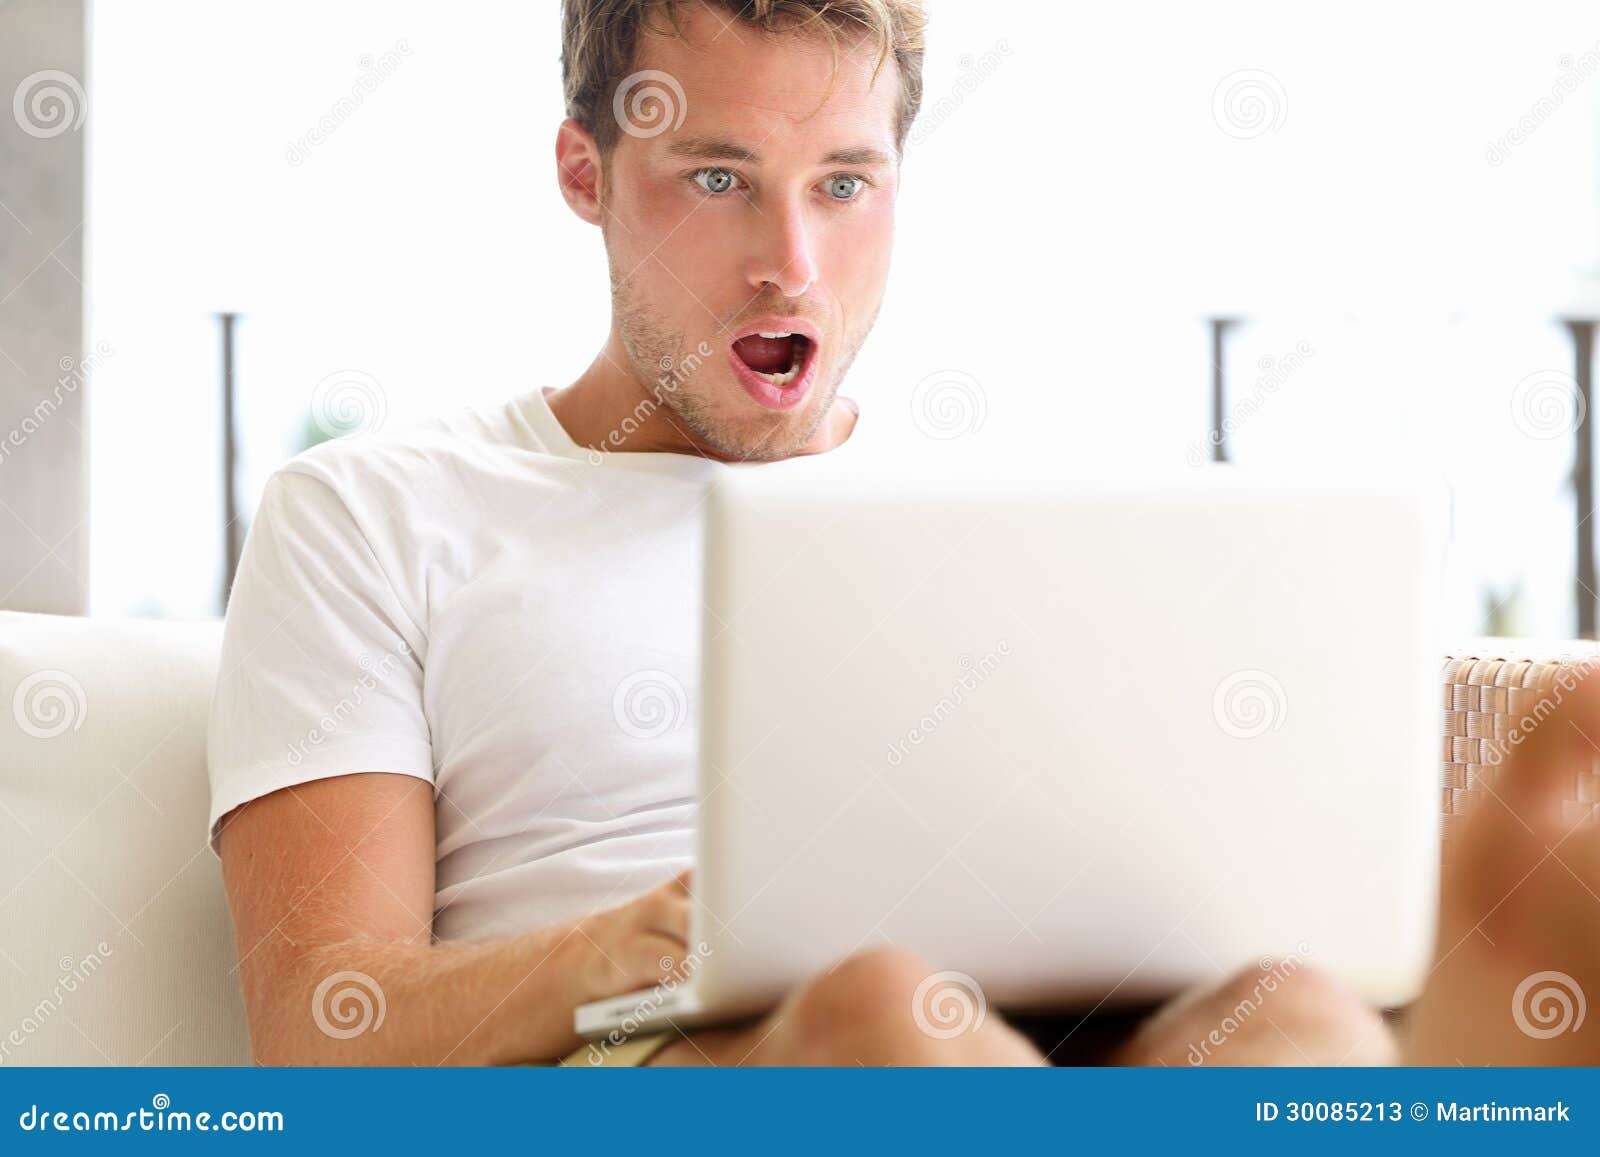 shocked-surprised-man-looking-laptop-computer-surprised-amazed-open-mouth-big-eyes-funny-young-male-model-sitting-outside-sofa-30085213.jpg